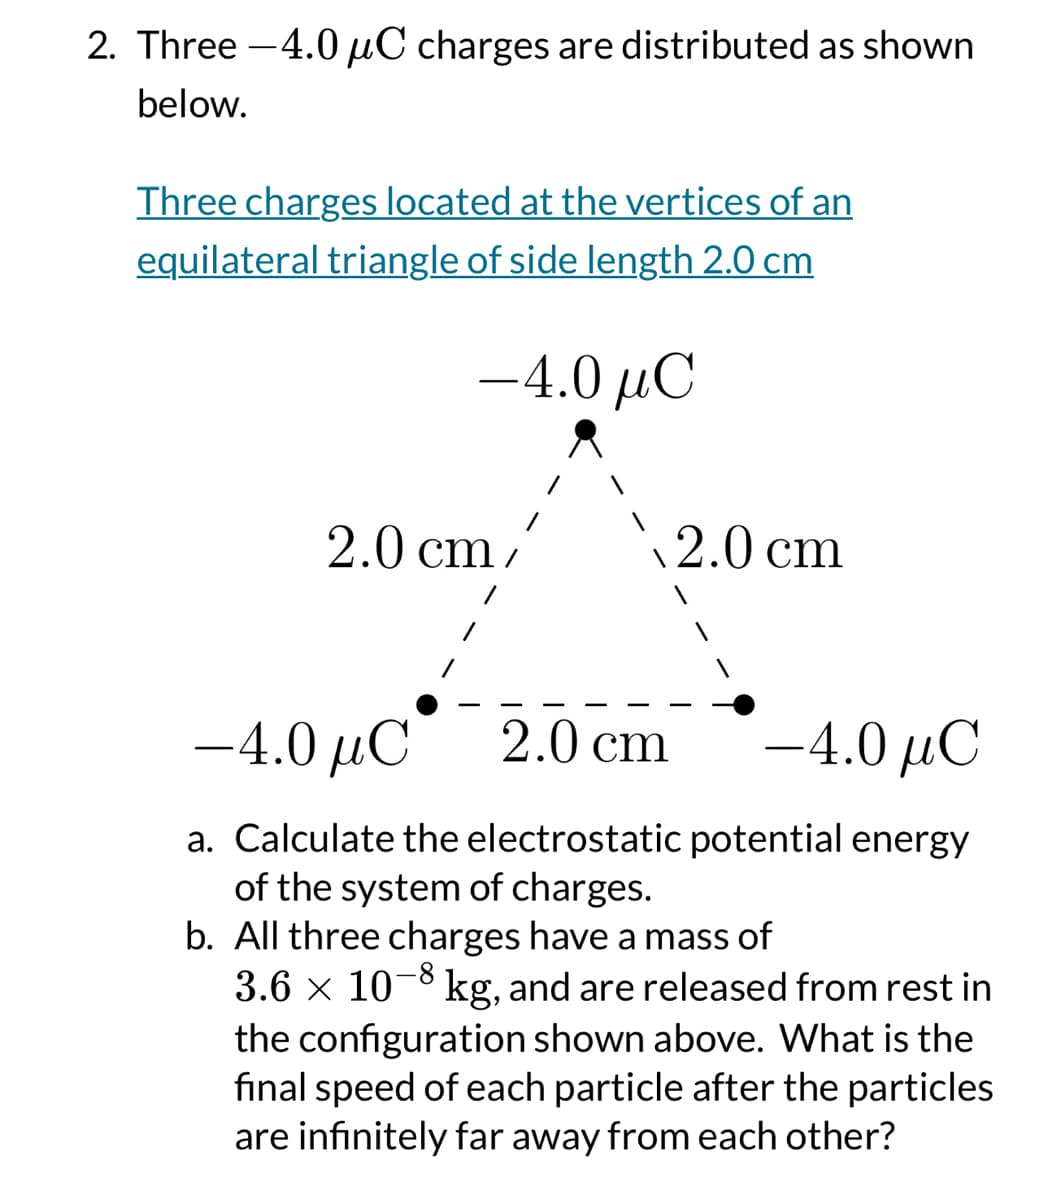 2. Three 4.0 μC charges are distributed as shown
below.
Three charges located at the vertices of an
equilateral triangle of side length 2.0 cm
-4.0 μC
2.0 cm
2.0 cm
-4.0 μC
2.0 cm
-4.0 μC
a. Calculate the electrostatic potential energy
of the system of charges.
b. All three charges have a mass of
3.6 × 108 kg, and are released from rest in
the configuration shown above. What is the
final speed of each particle after the particles
are infinitely far away from each other?